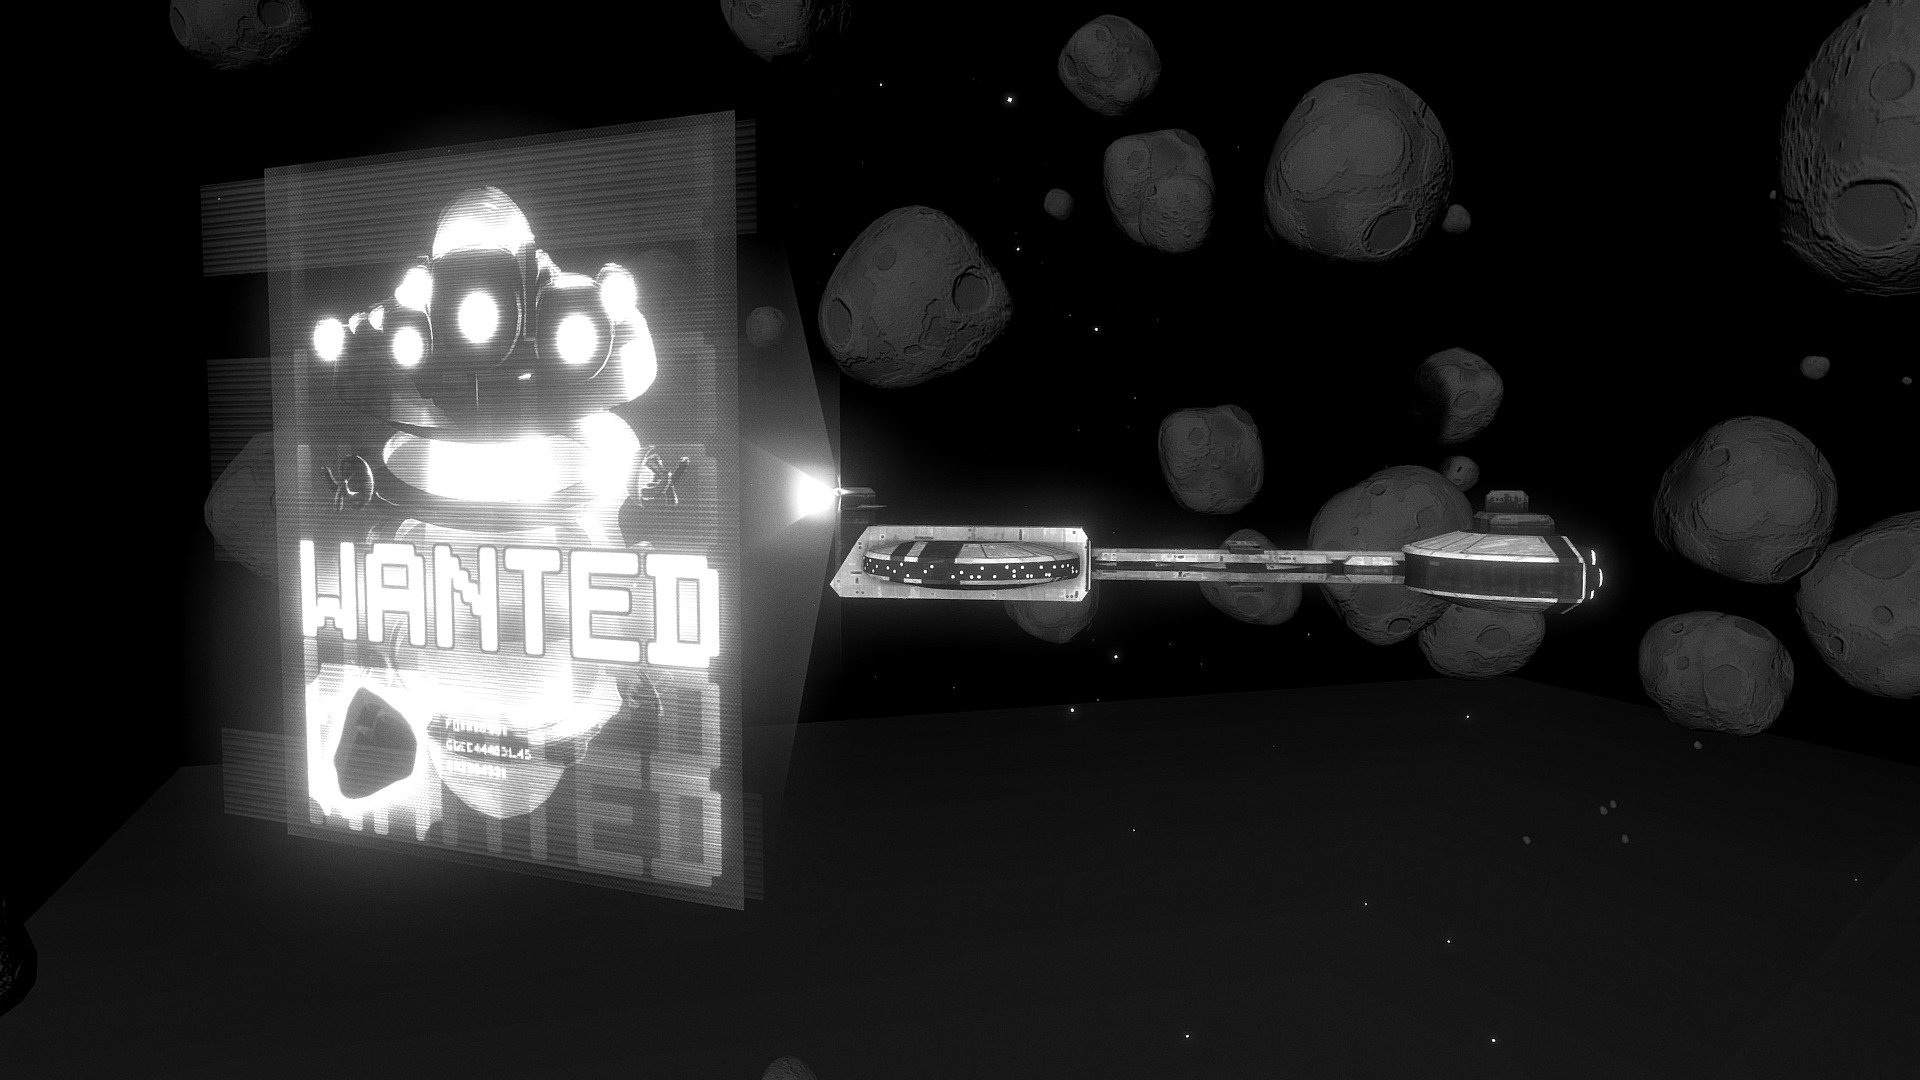 The starships of the investigation bureau are looking for Tartulyst, a robotic creature, who stole a cosmic stone. He's hidding in this asteroid field. Find him !


HOW TO PLAY
HTC Vive and Oculus Rift users

Dowload a WebVR-compatible browser : https://webvr.info/

And click on the cardboard icon.

More infos on VR Compatibility : https://help.sketchfab.com/hc/en-us/articles/115001057006-VR-Compatibility

Web browser users

Click on settings (gear icon) &gt; Navigation &gt; First person view.
Scroll down on the experience screen to set the mouse speed to zero.
Use Z,Q,S,D and the mouse for movement 3d model